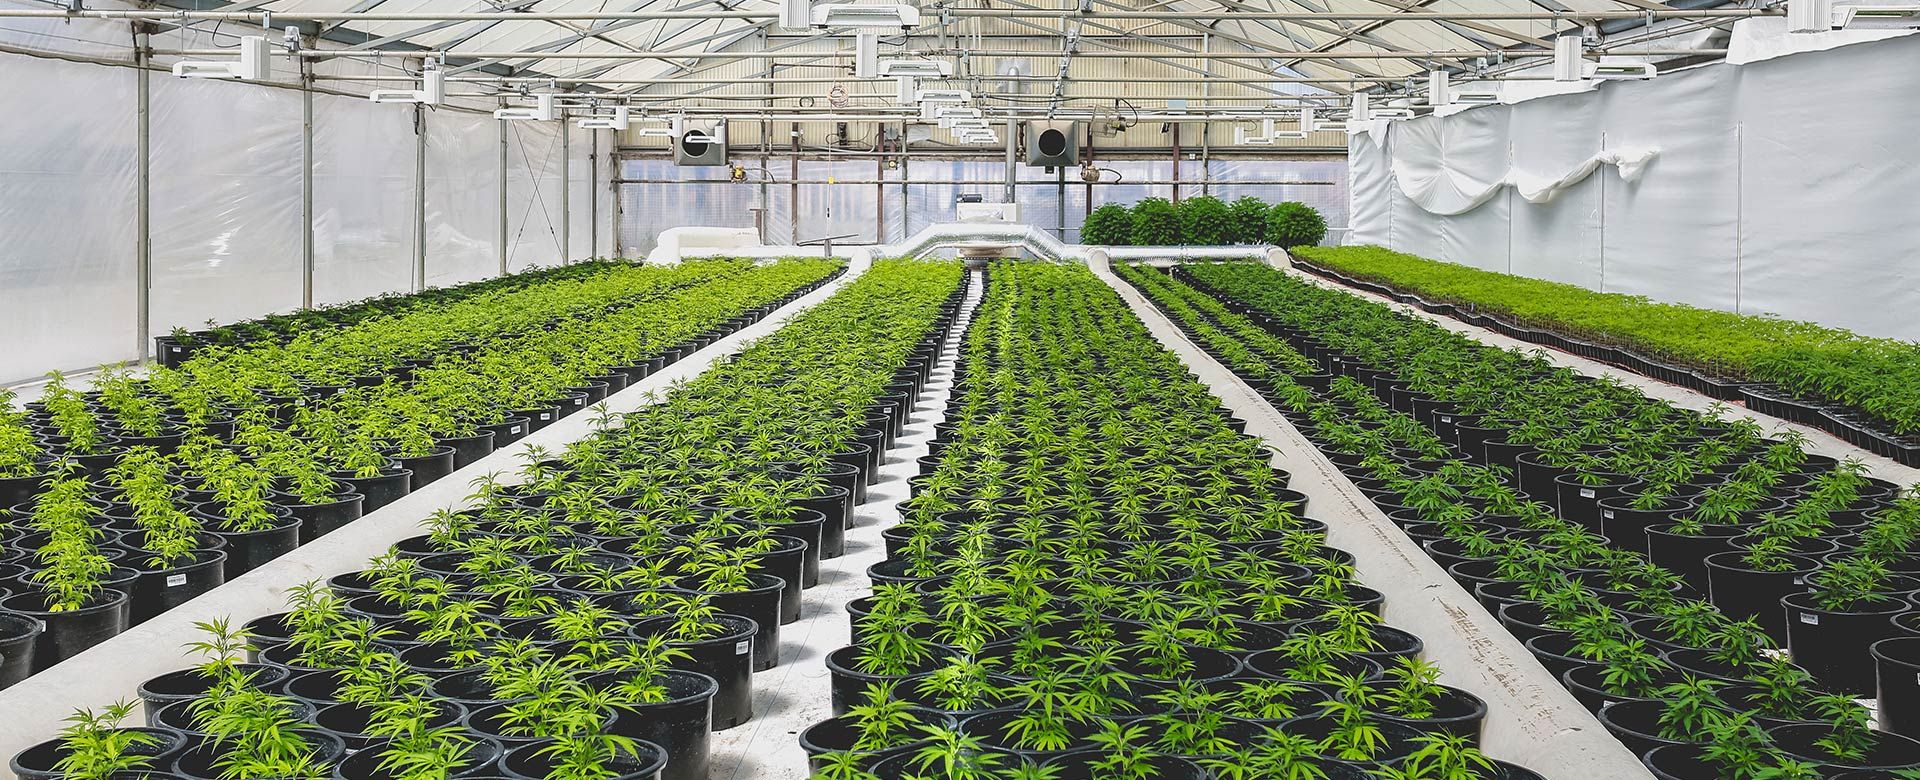 Expanding cannabis industries and where we can help